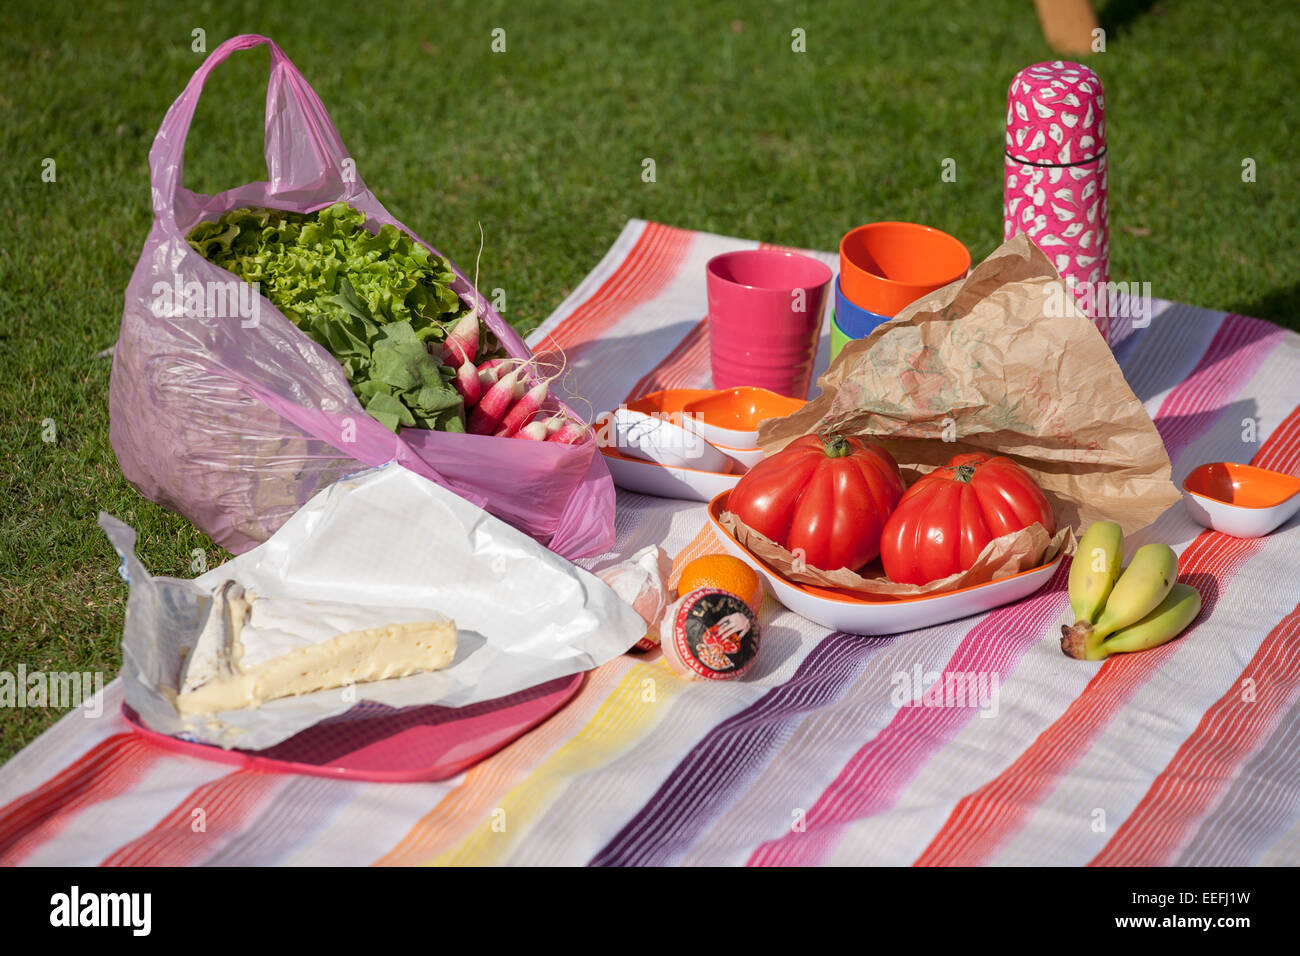 Picnic lunch on colourful rug in summer Stock Photo